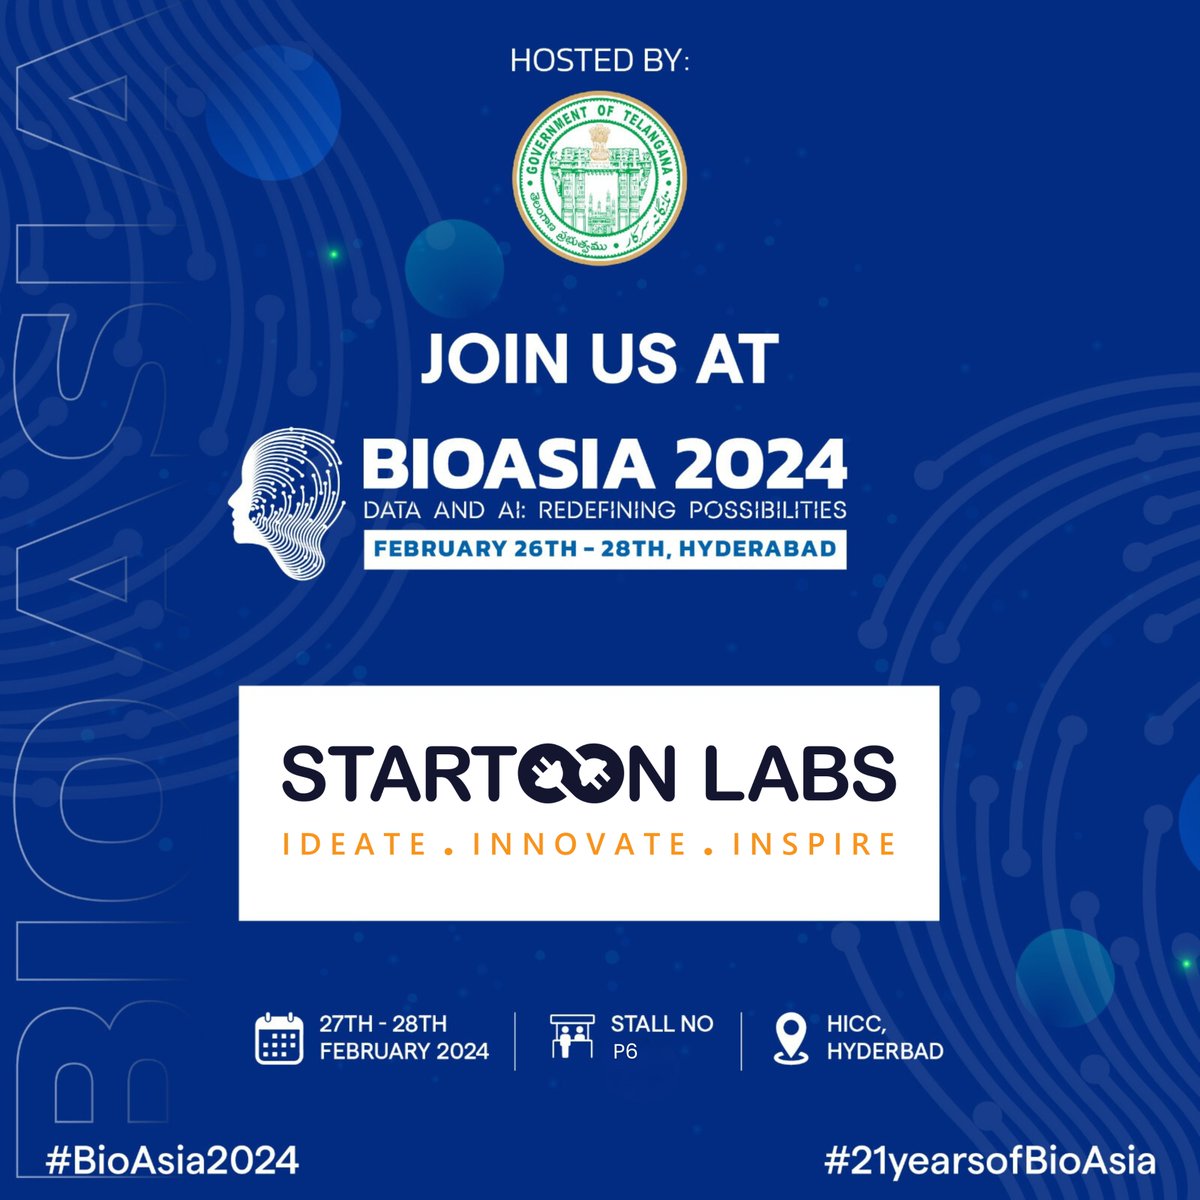 Exciting News! Startoon Lab is thrilled to announce our presence at the BioAsia2024 conference on Feb 27-28 at Startup Stage
@TS_LifeSciences & @BioAsiaOfficial 
#BioAsia2024 #BiotechInnovation #HealthcareRevolution #LifeSciences #HealthTech #BioAsiaEvent #BiotechnologyConference